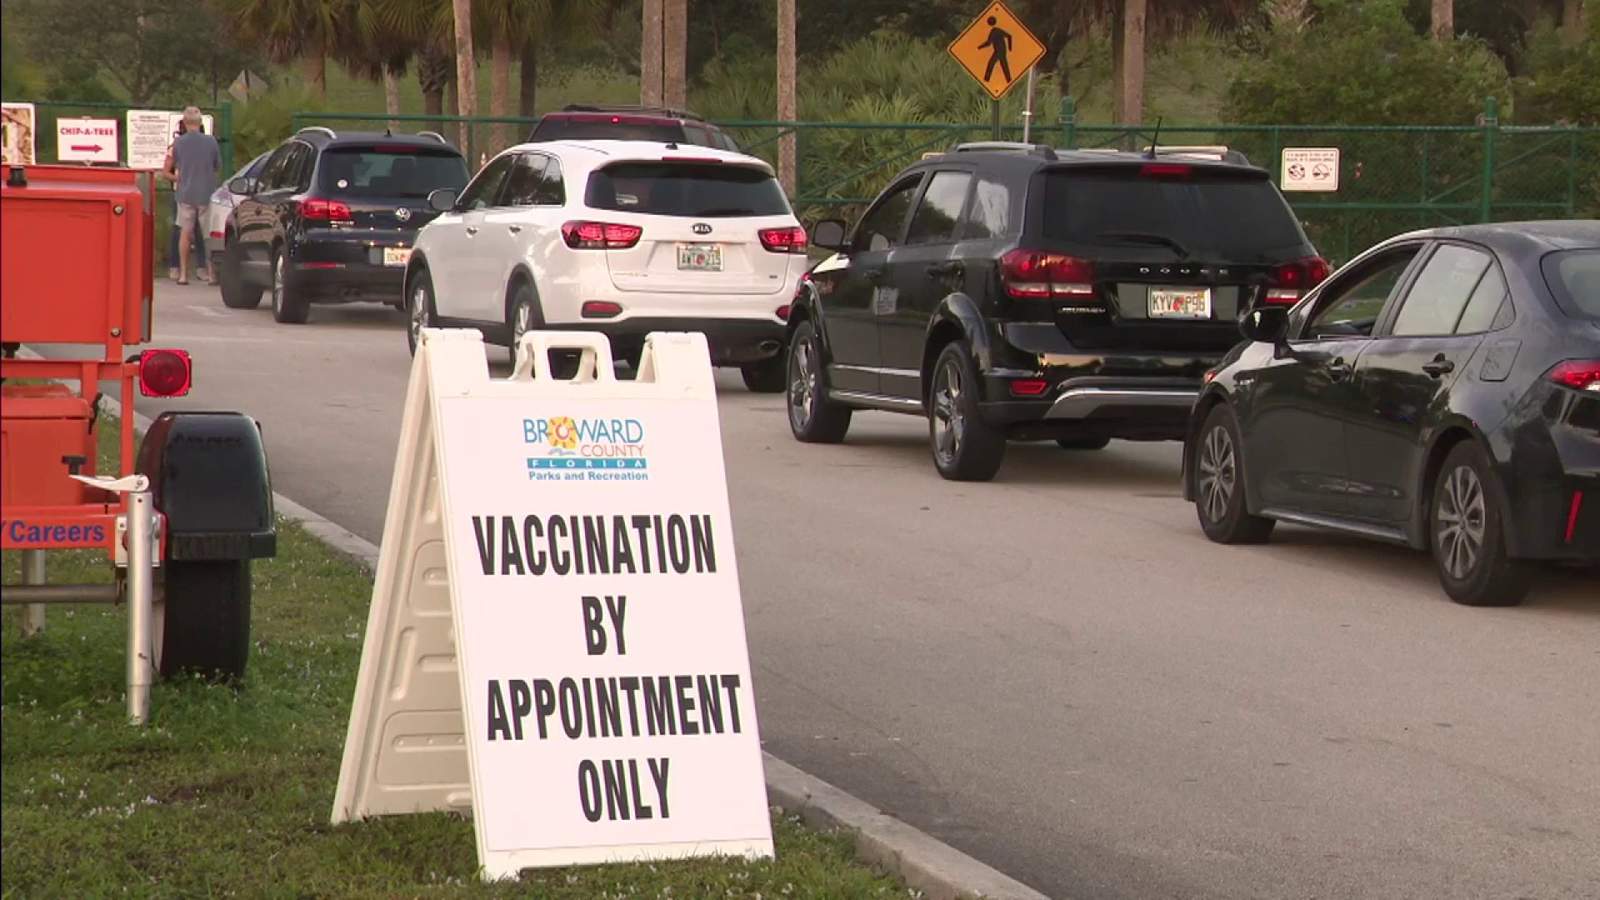 Day 1 of COVID-19 vaccine rollout in Broward County less than smooth sailing